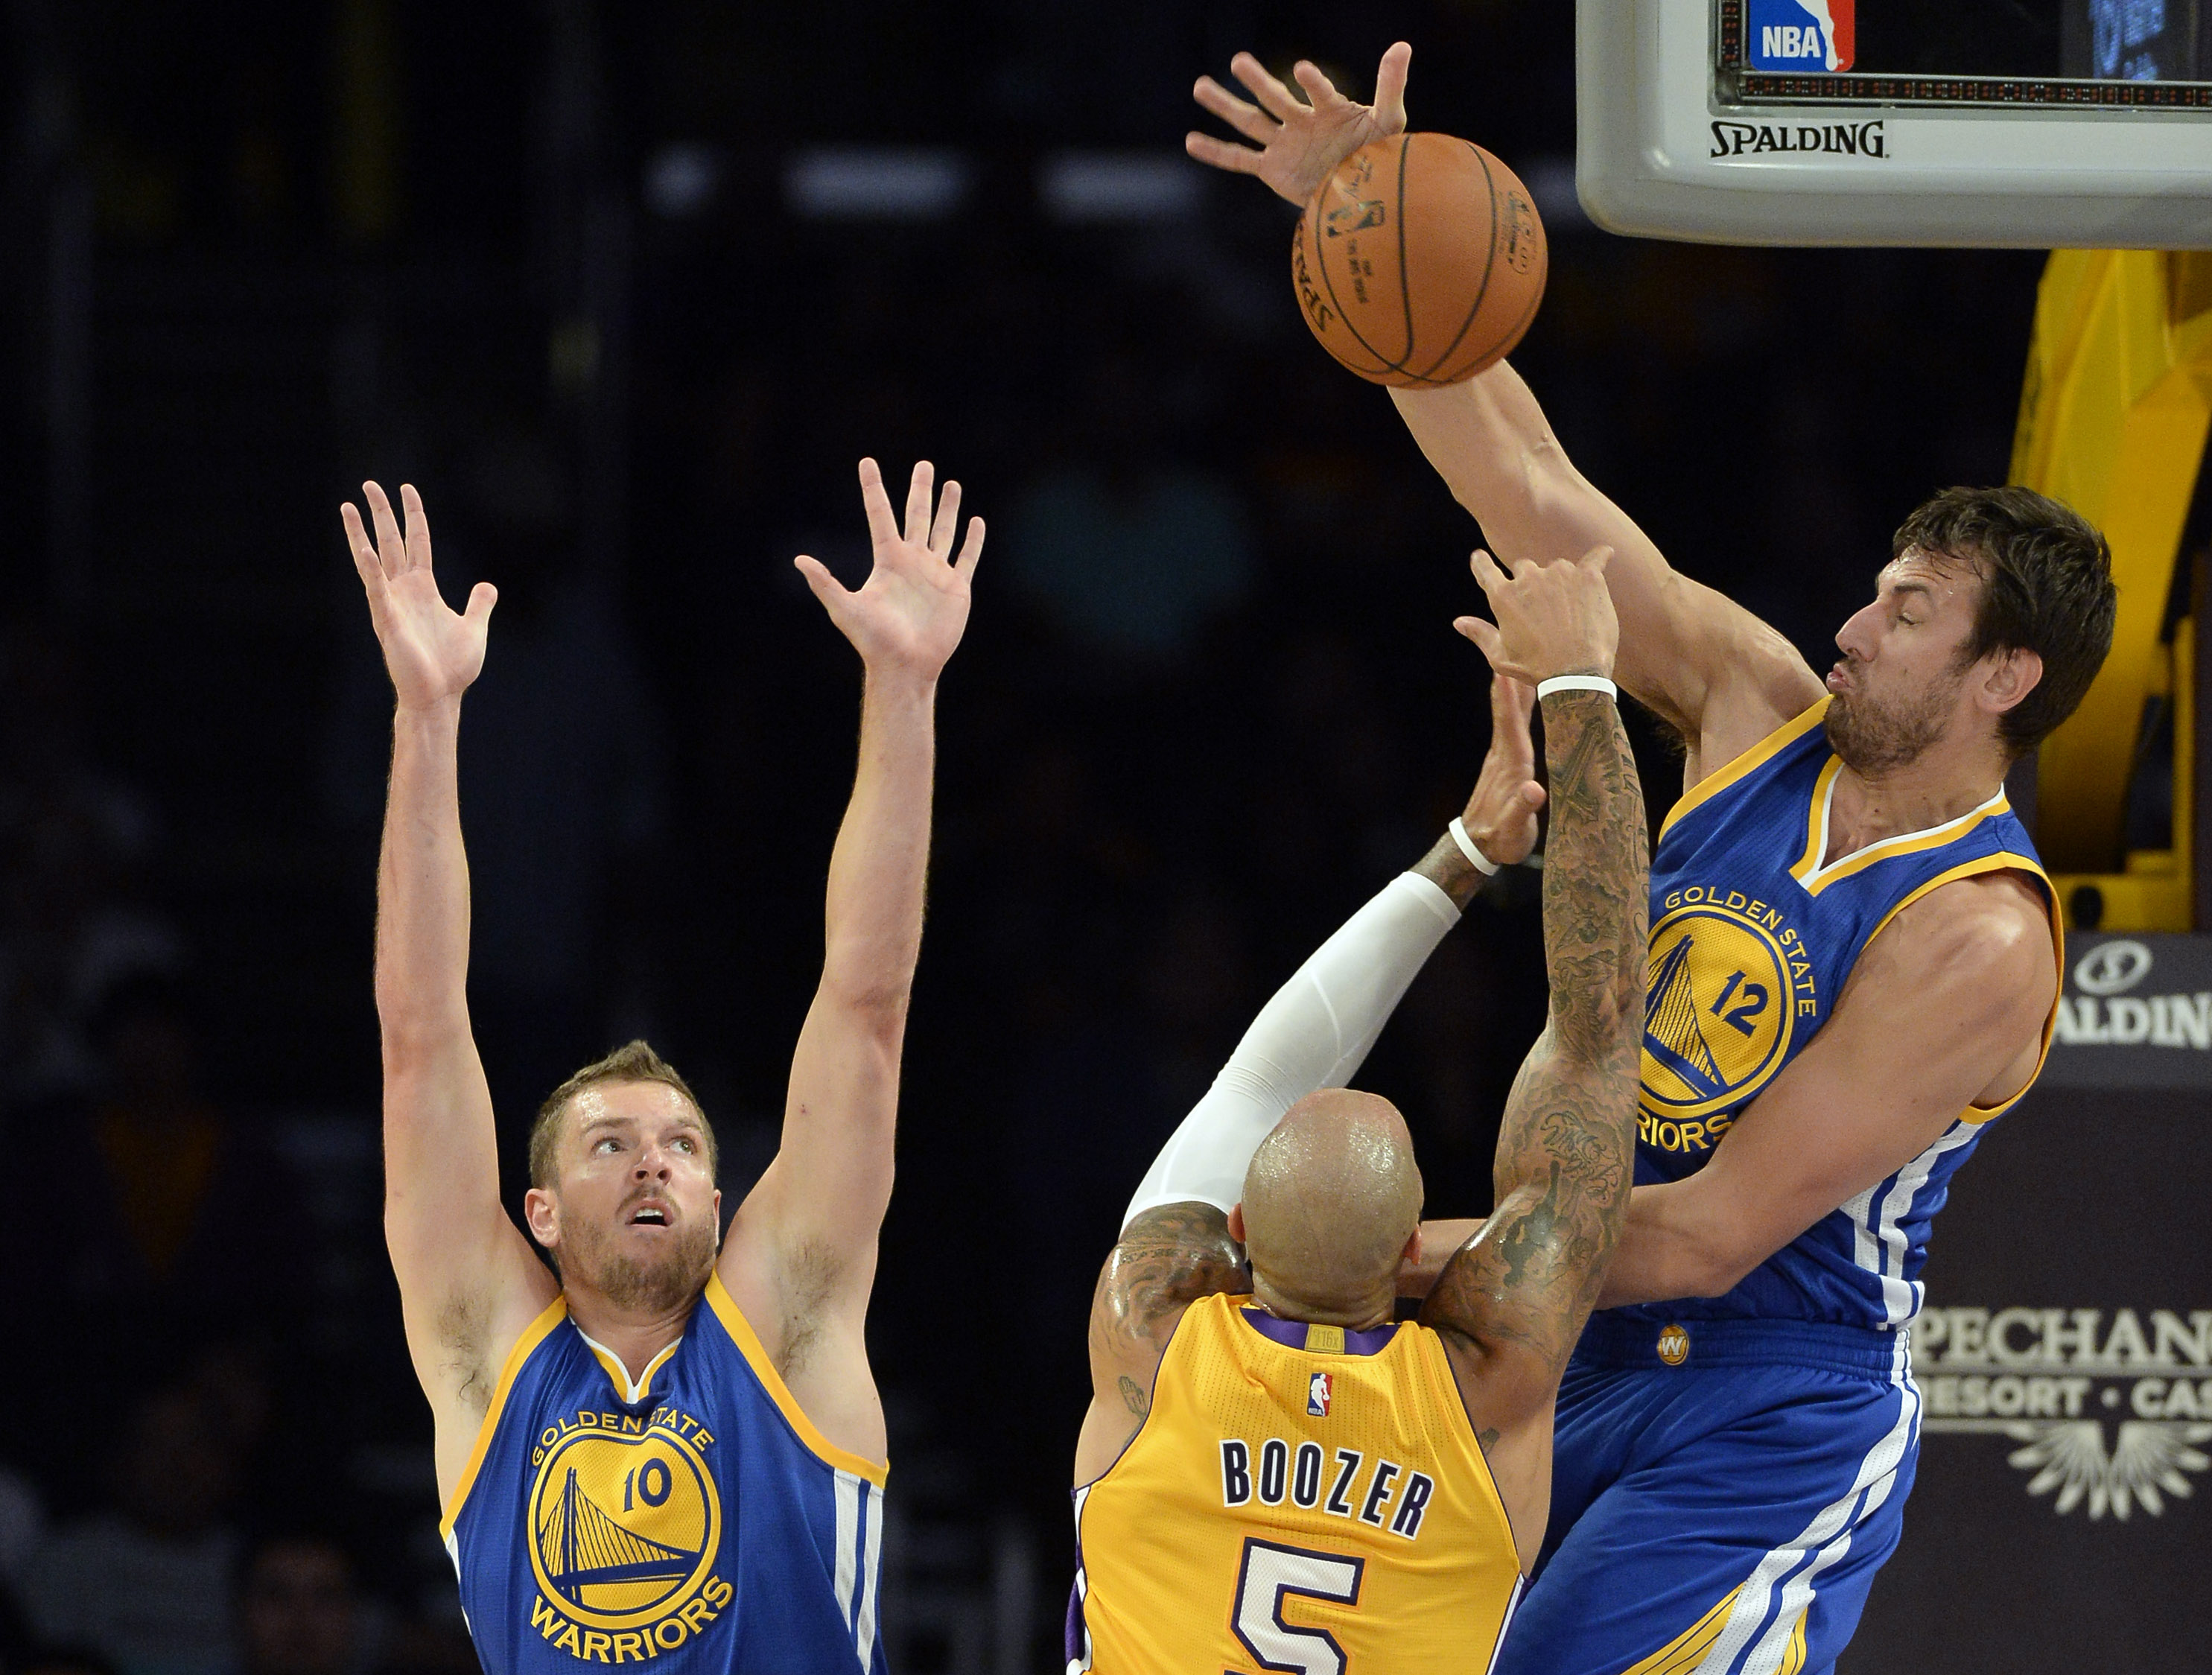 Oct 9, 2014; Los Angeles, CA, USA; Golden State Warriors center Andrew Bogut (12) blocks the shot of Los Angeles Lakers forward Carlos Boozer (5) during the first half at Staples Center. (Richard Mackson-USA TODAY Sports)